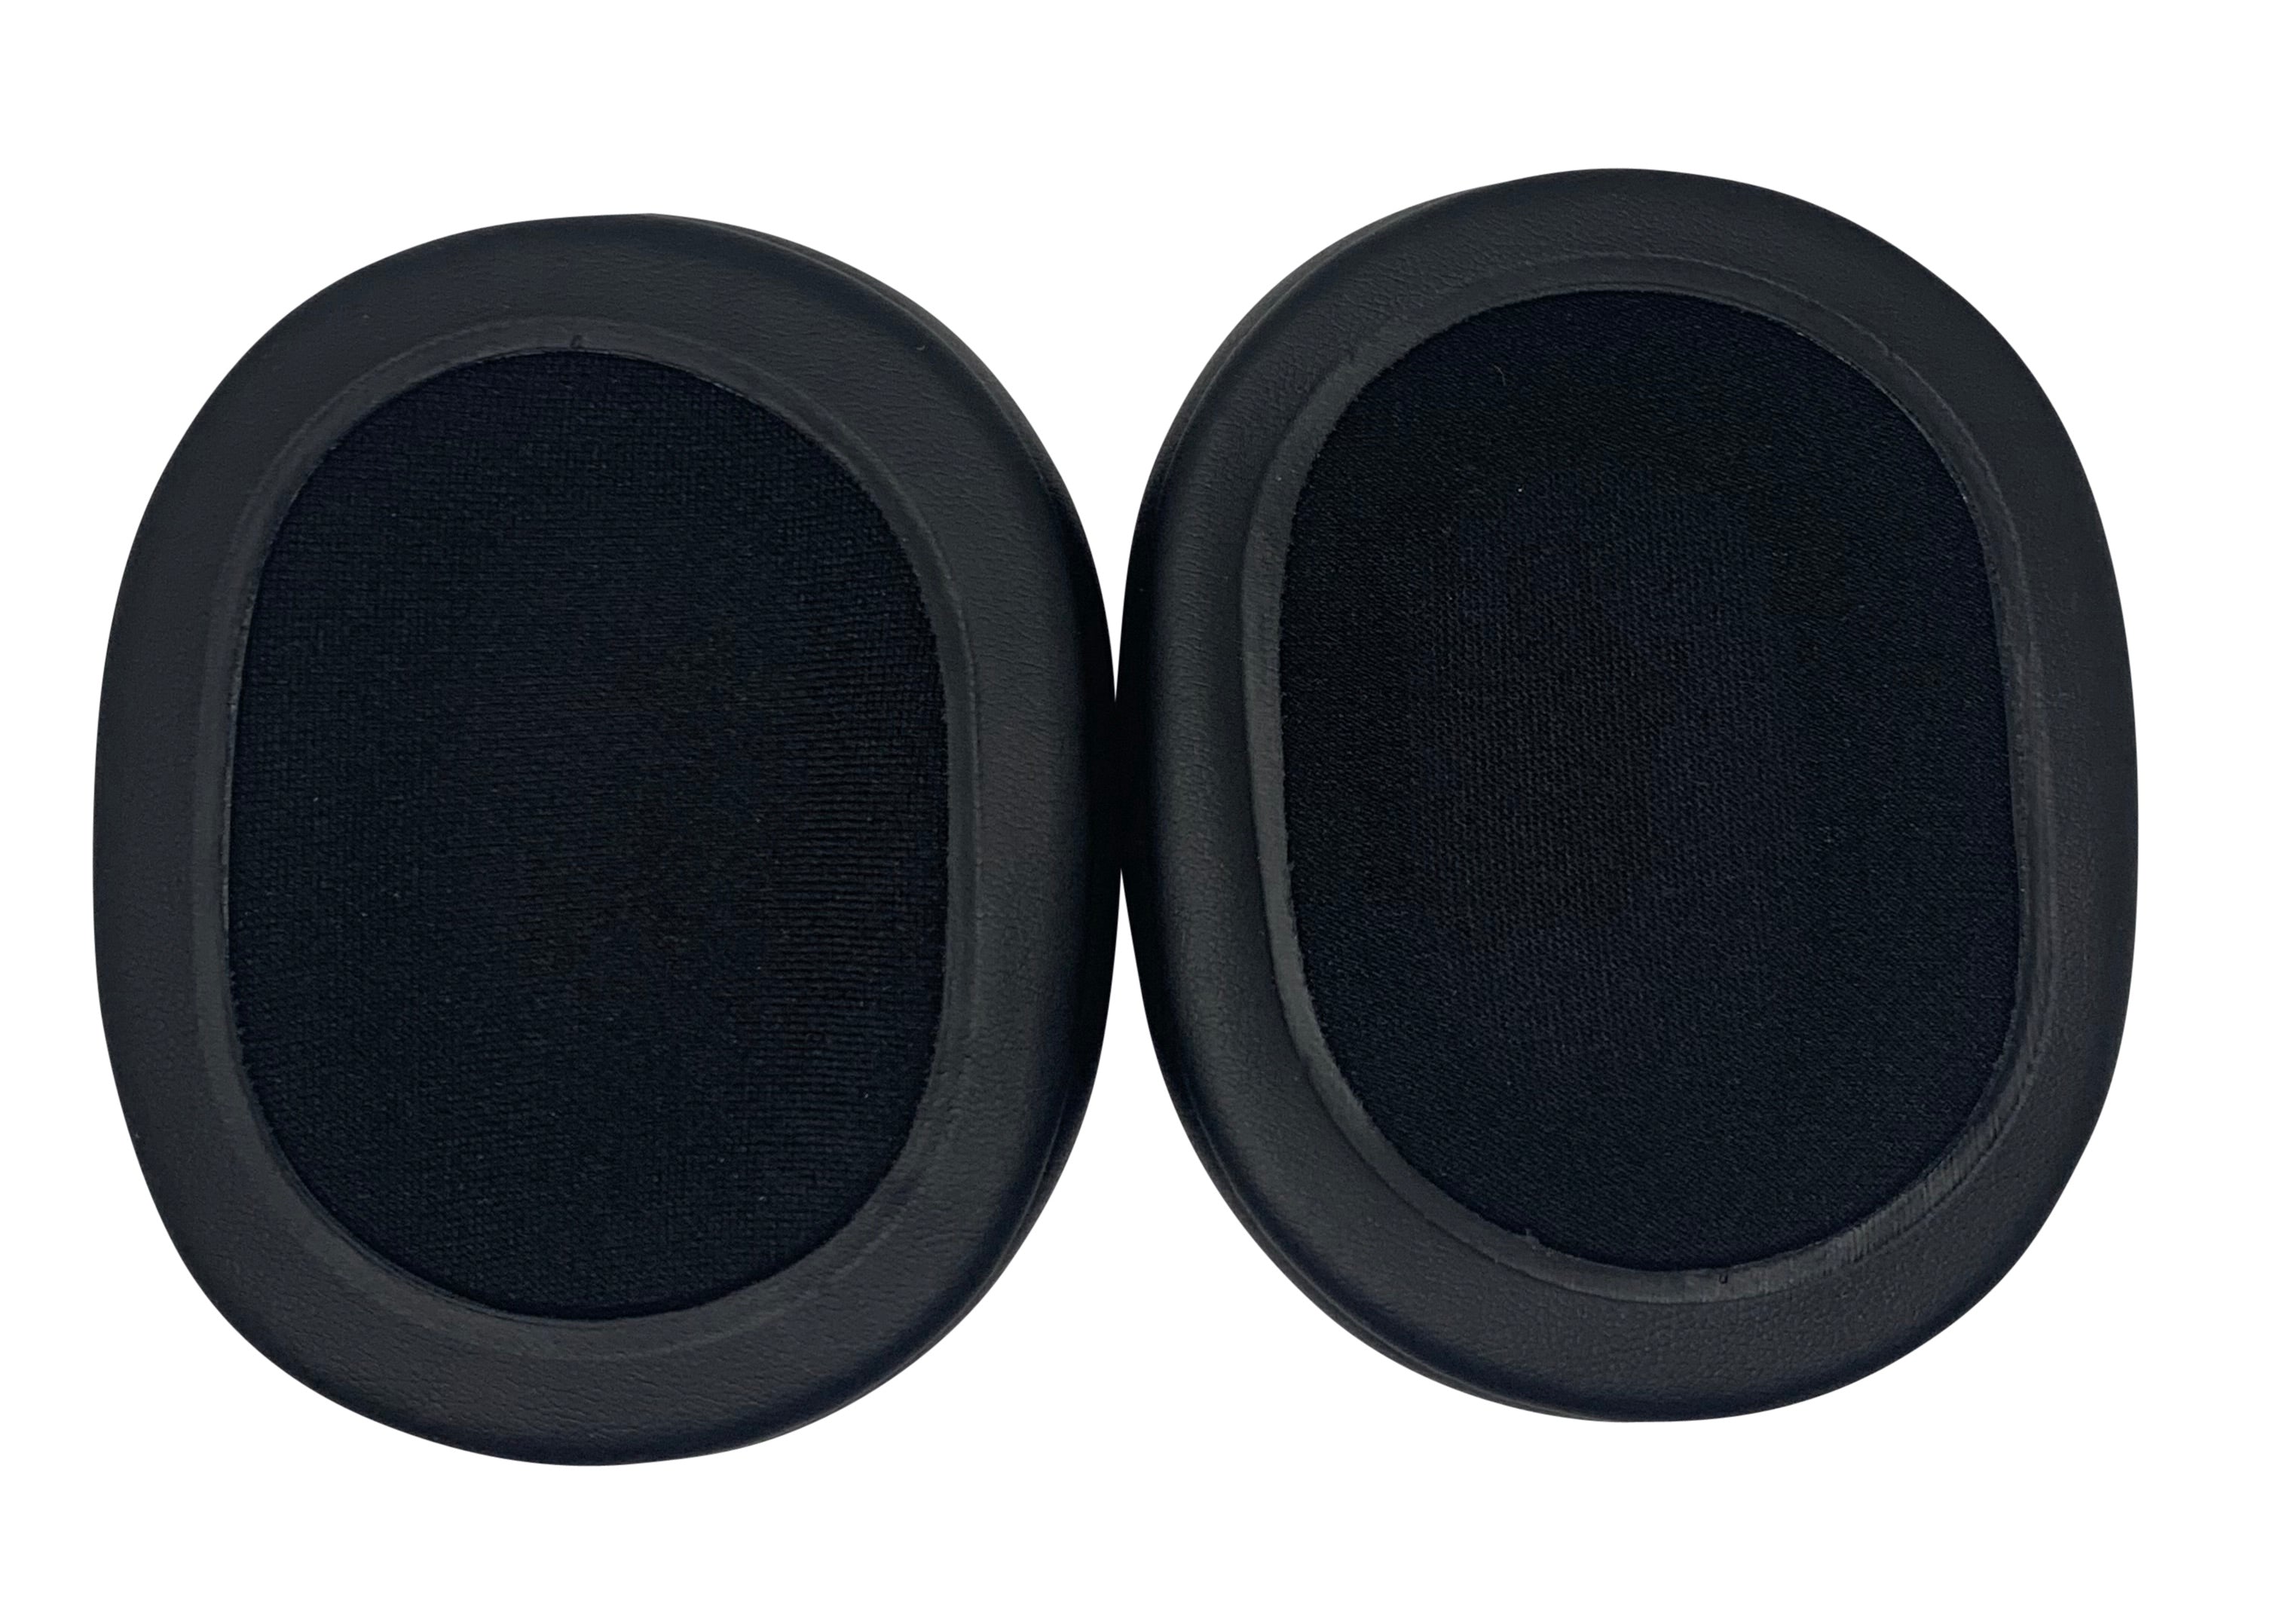 CentralSound Premium Memory Foam Ear Pad Cushions for Audio-Technica M Series Headphones - CentralSound